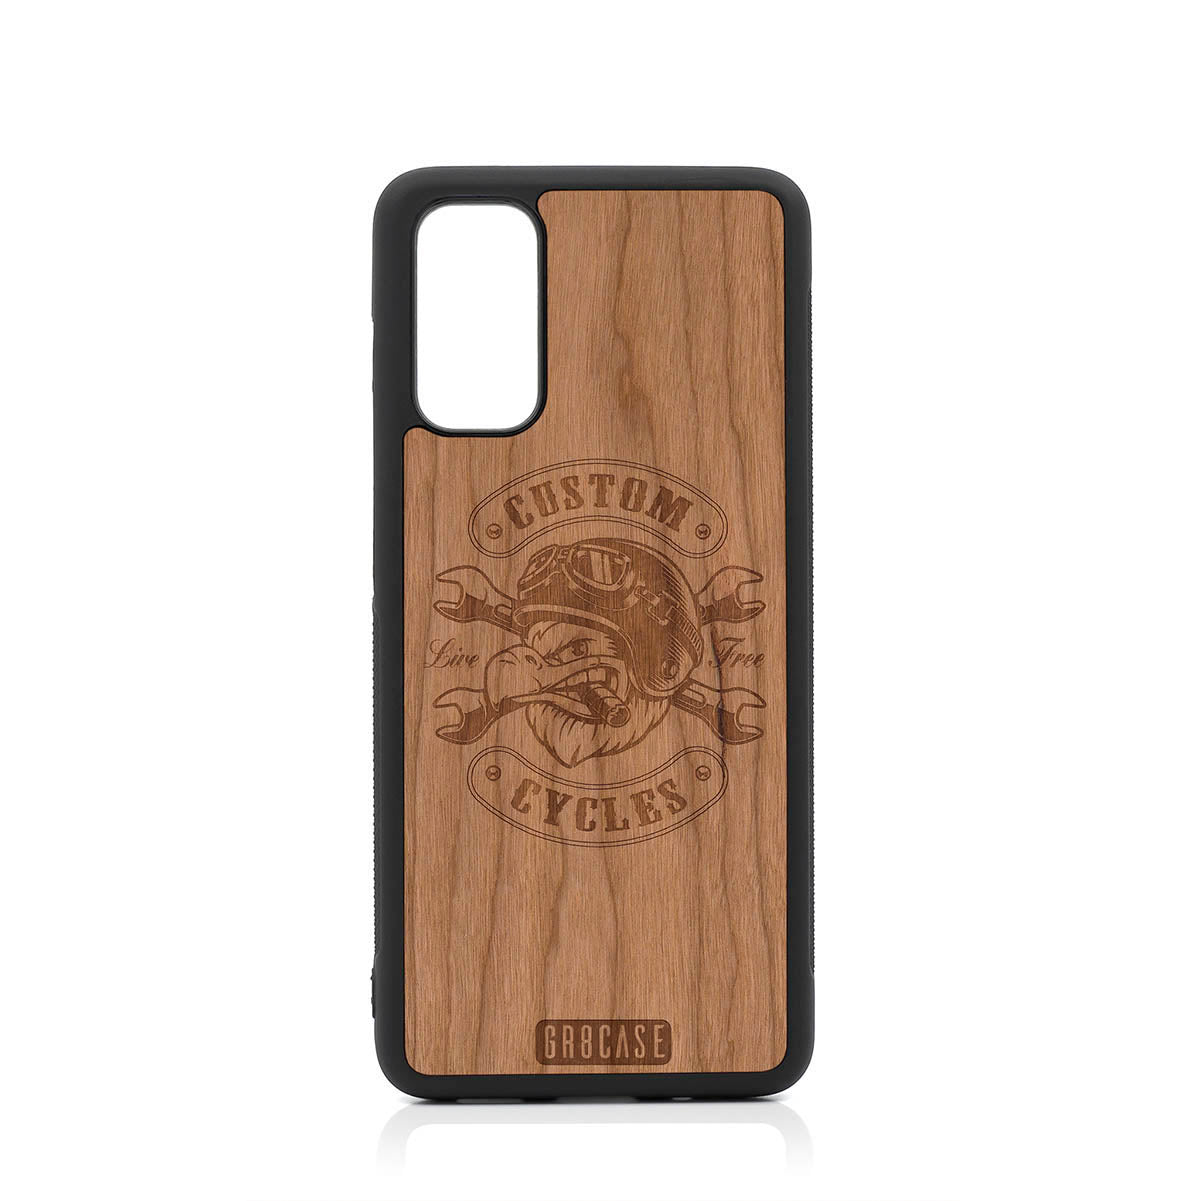 Custom Cycles Live Free (Biker Eagle) Design Wood Case For Samsung Galaxy S20 by GR8CASE